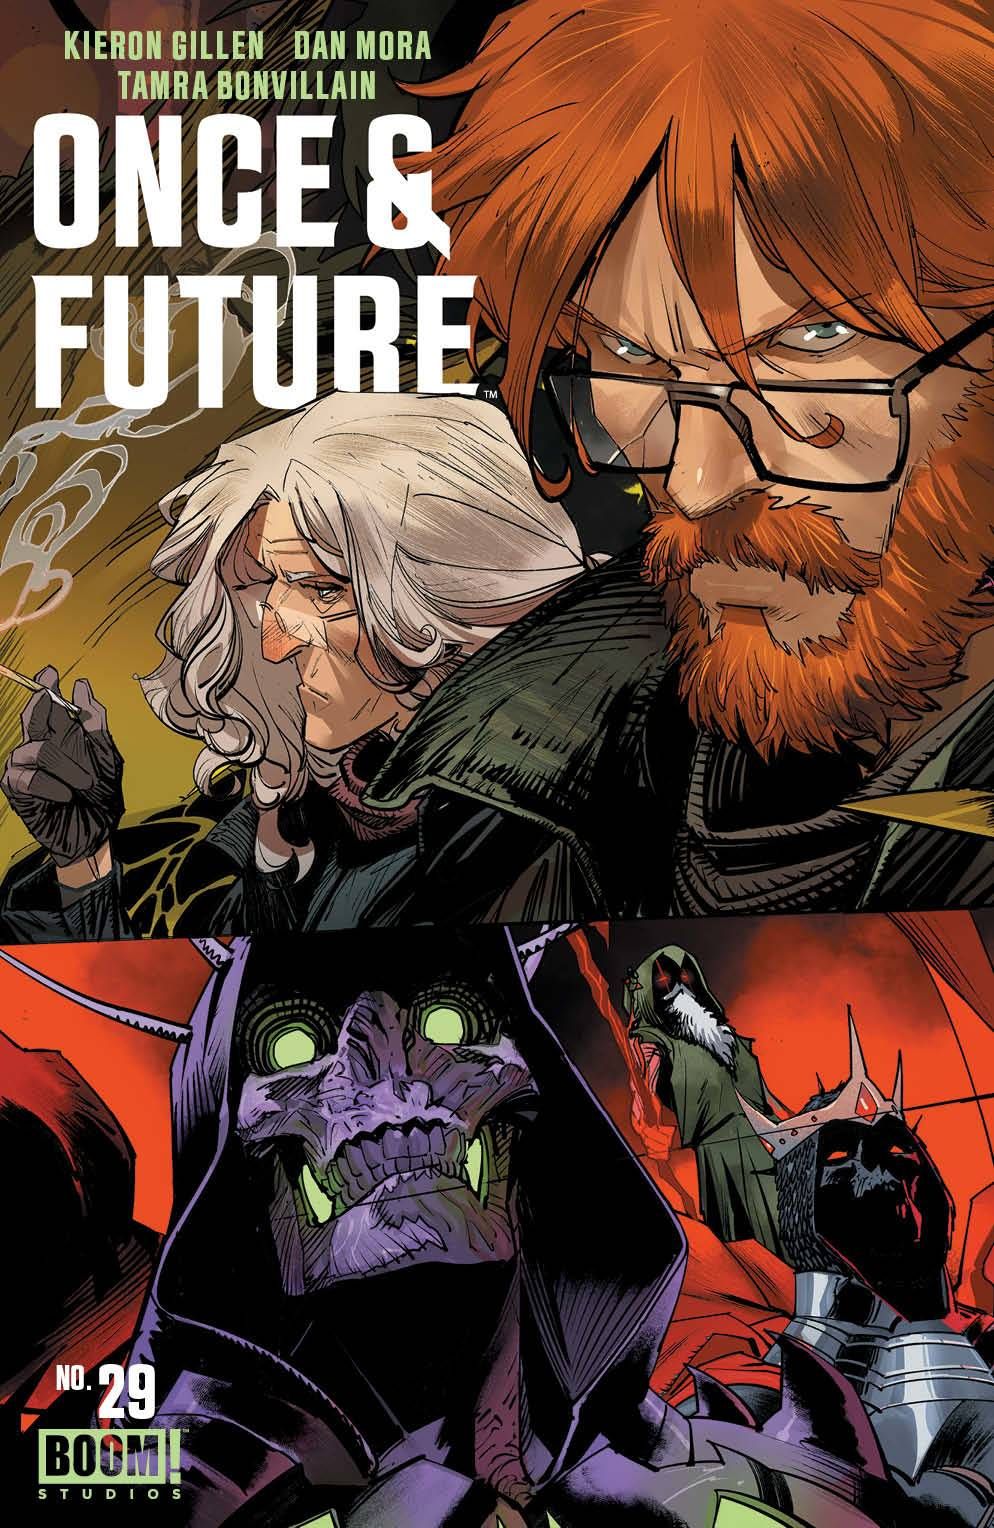 Once and Future #29 Comic